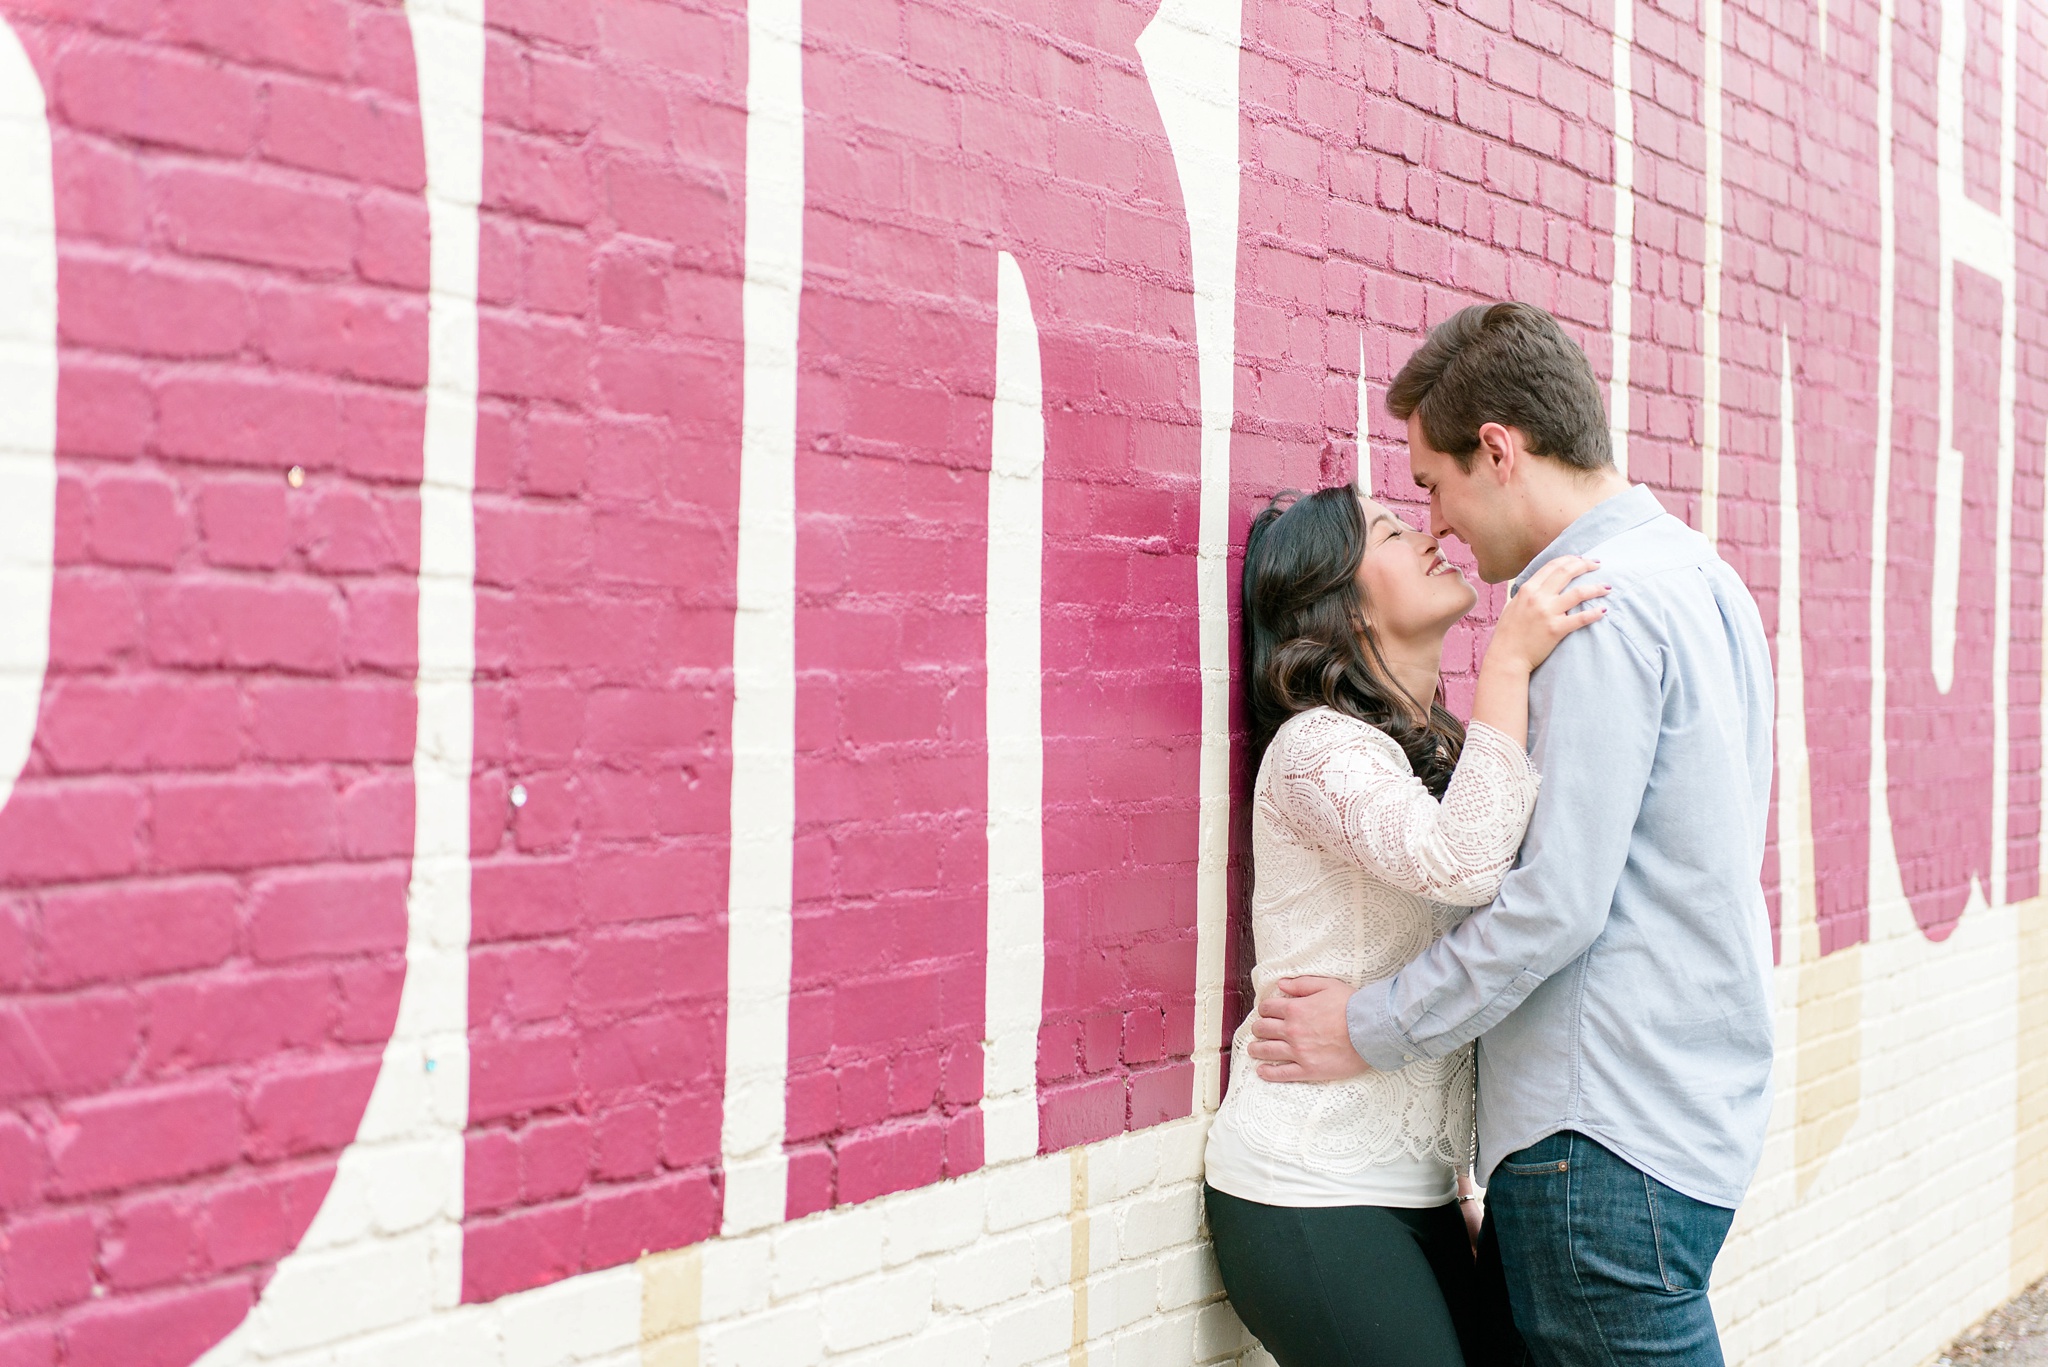 Downtown Nice to Have You in Birmingham Engagement Session| Birmingham Alabama Wedding Photographers_0005.jpg